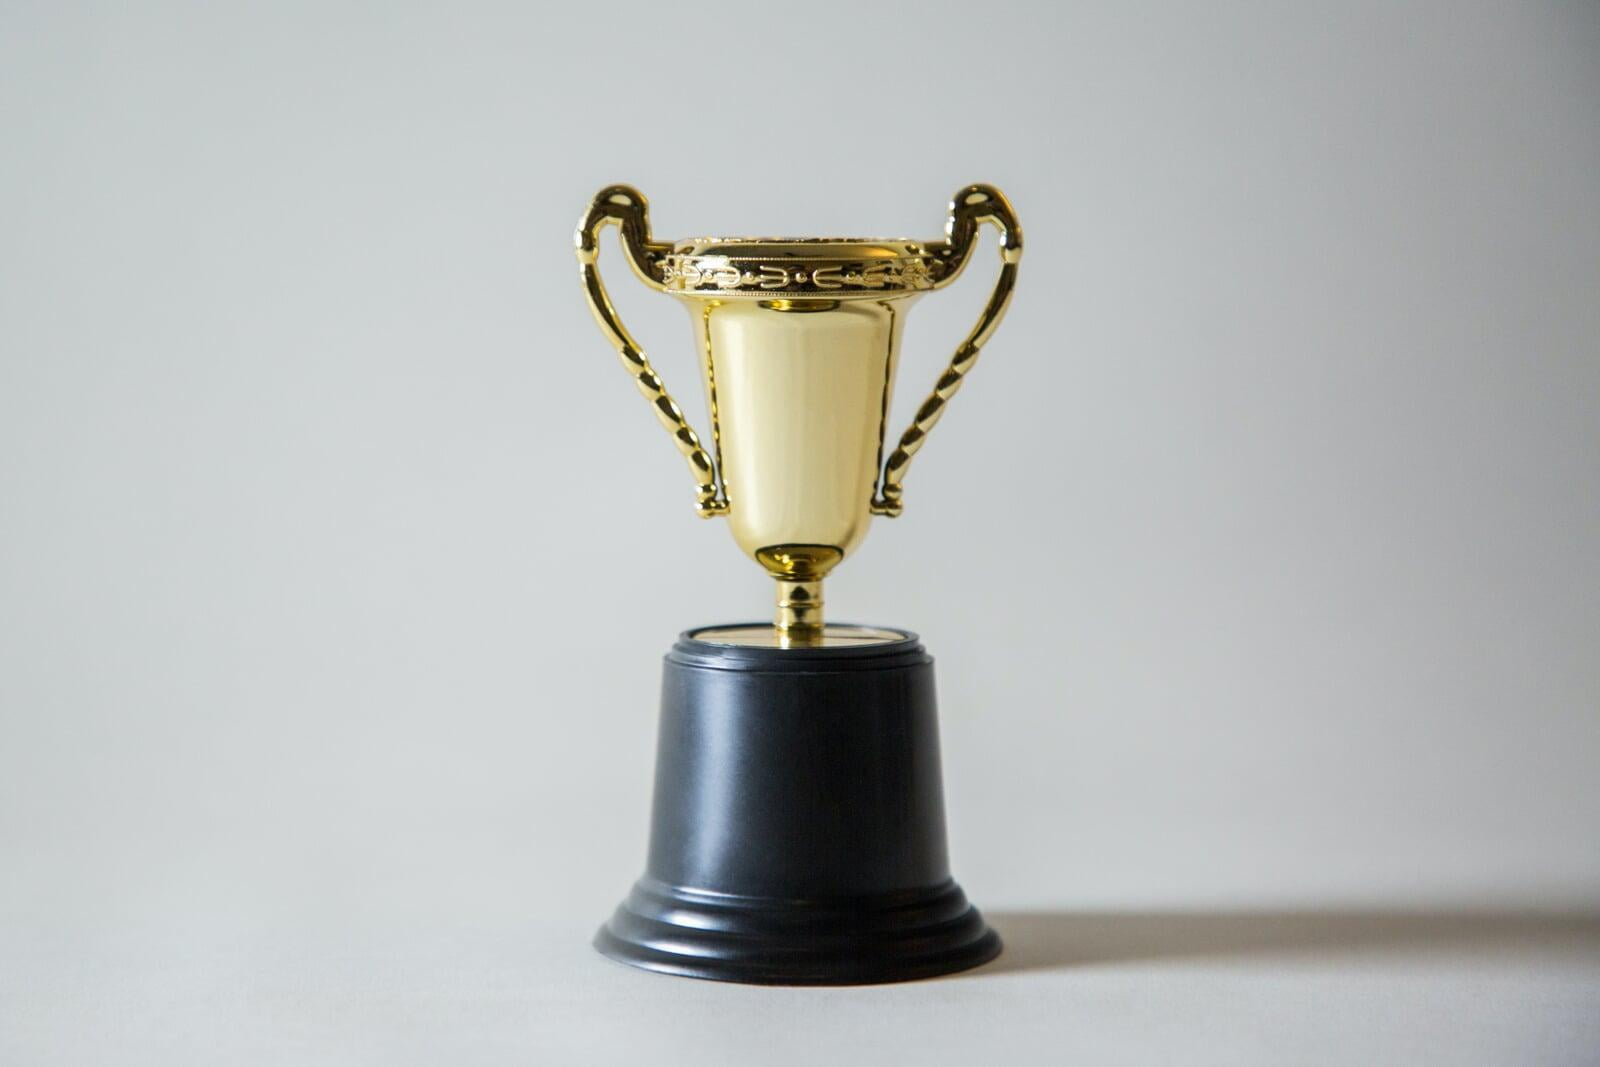 A gold cup shaped trophy mounted on a black base.